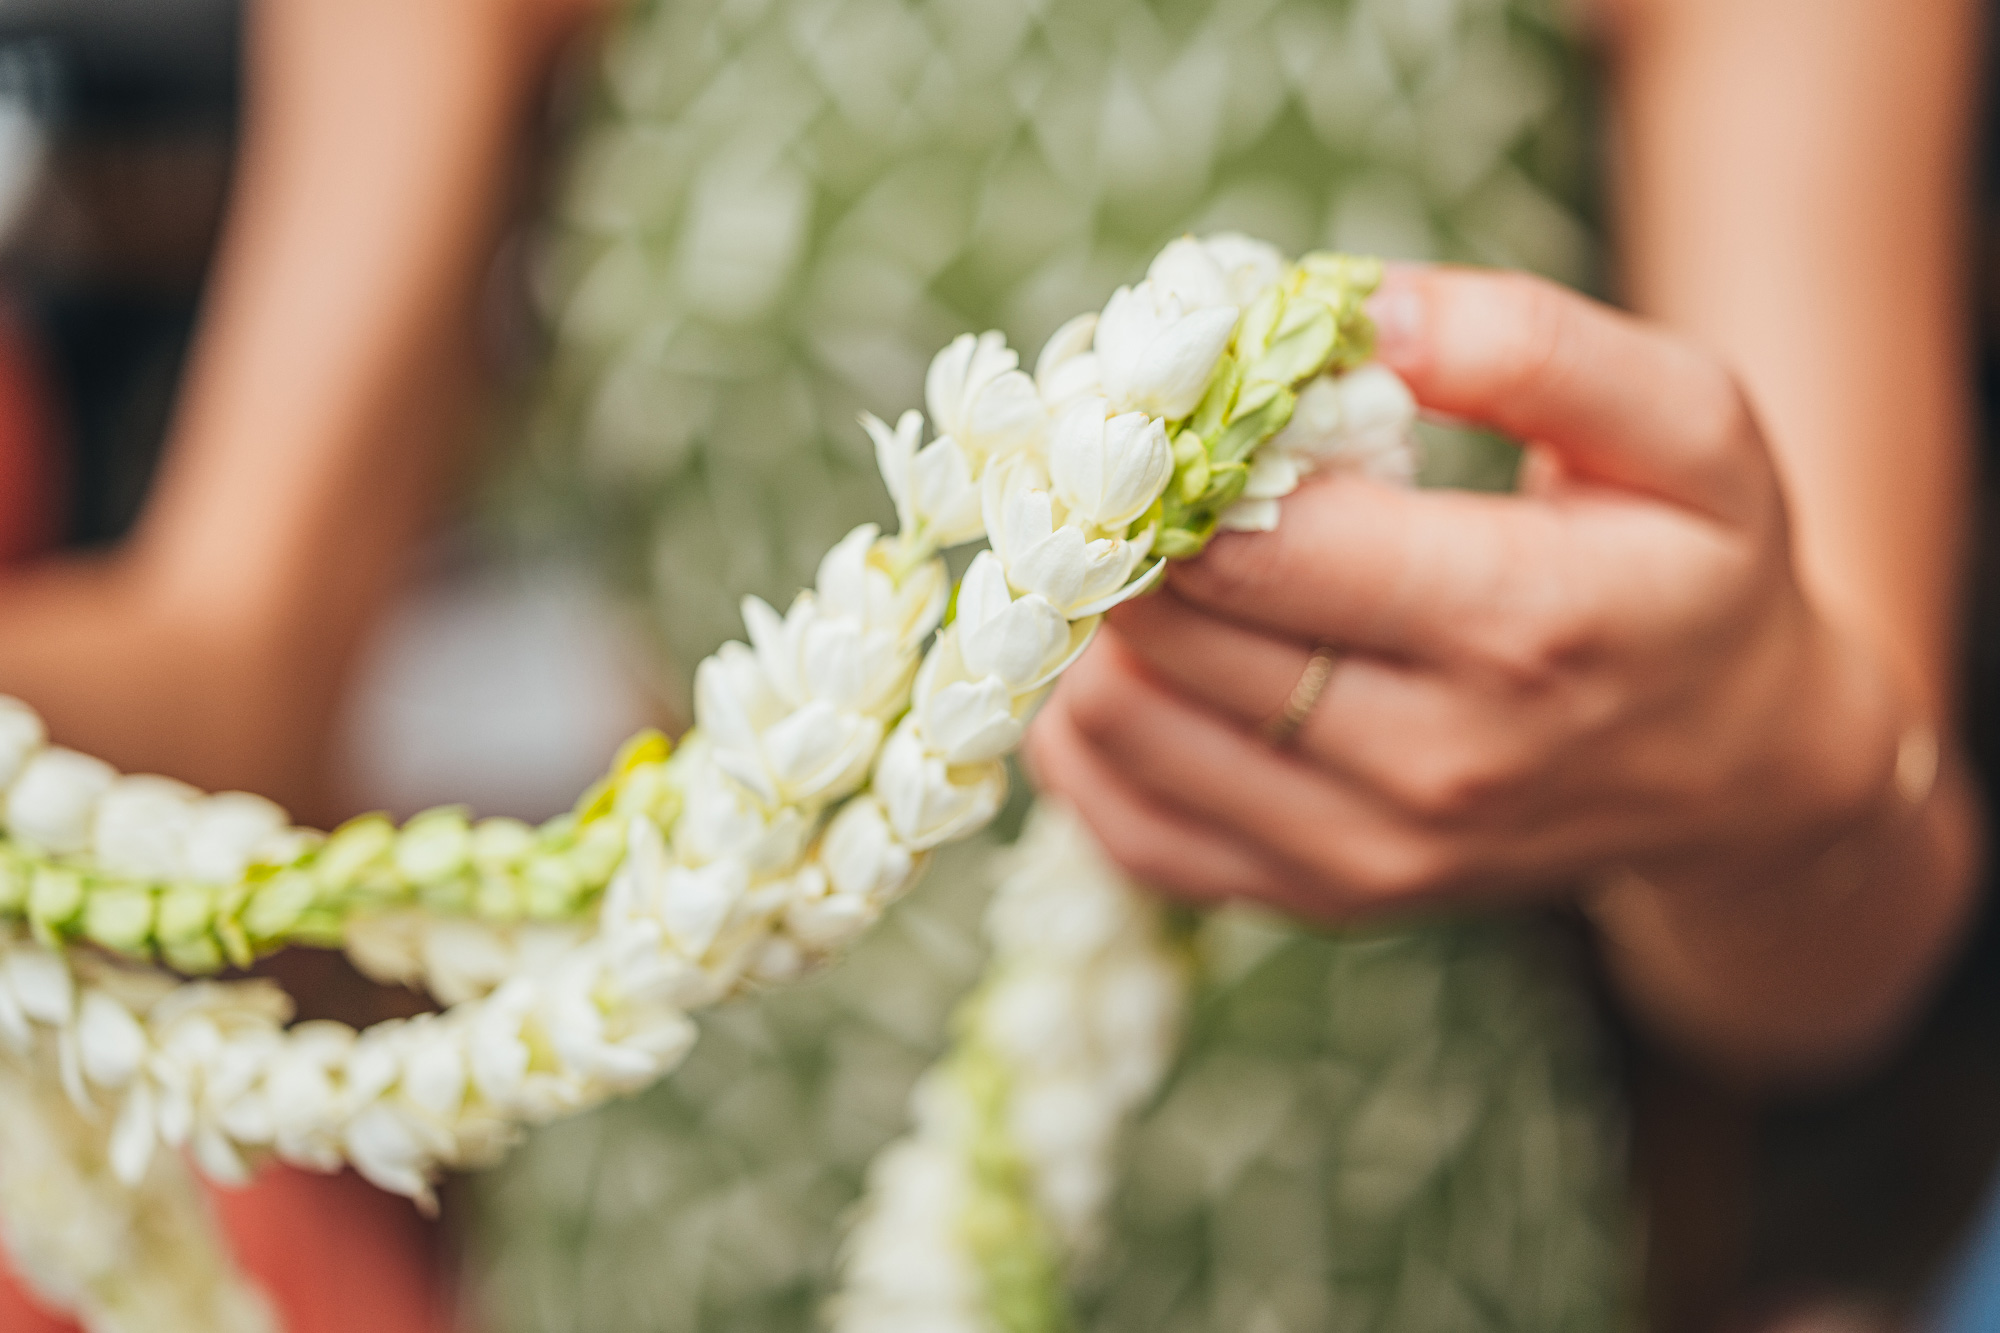 Woman holding lei